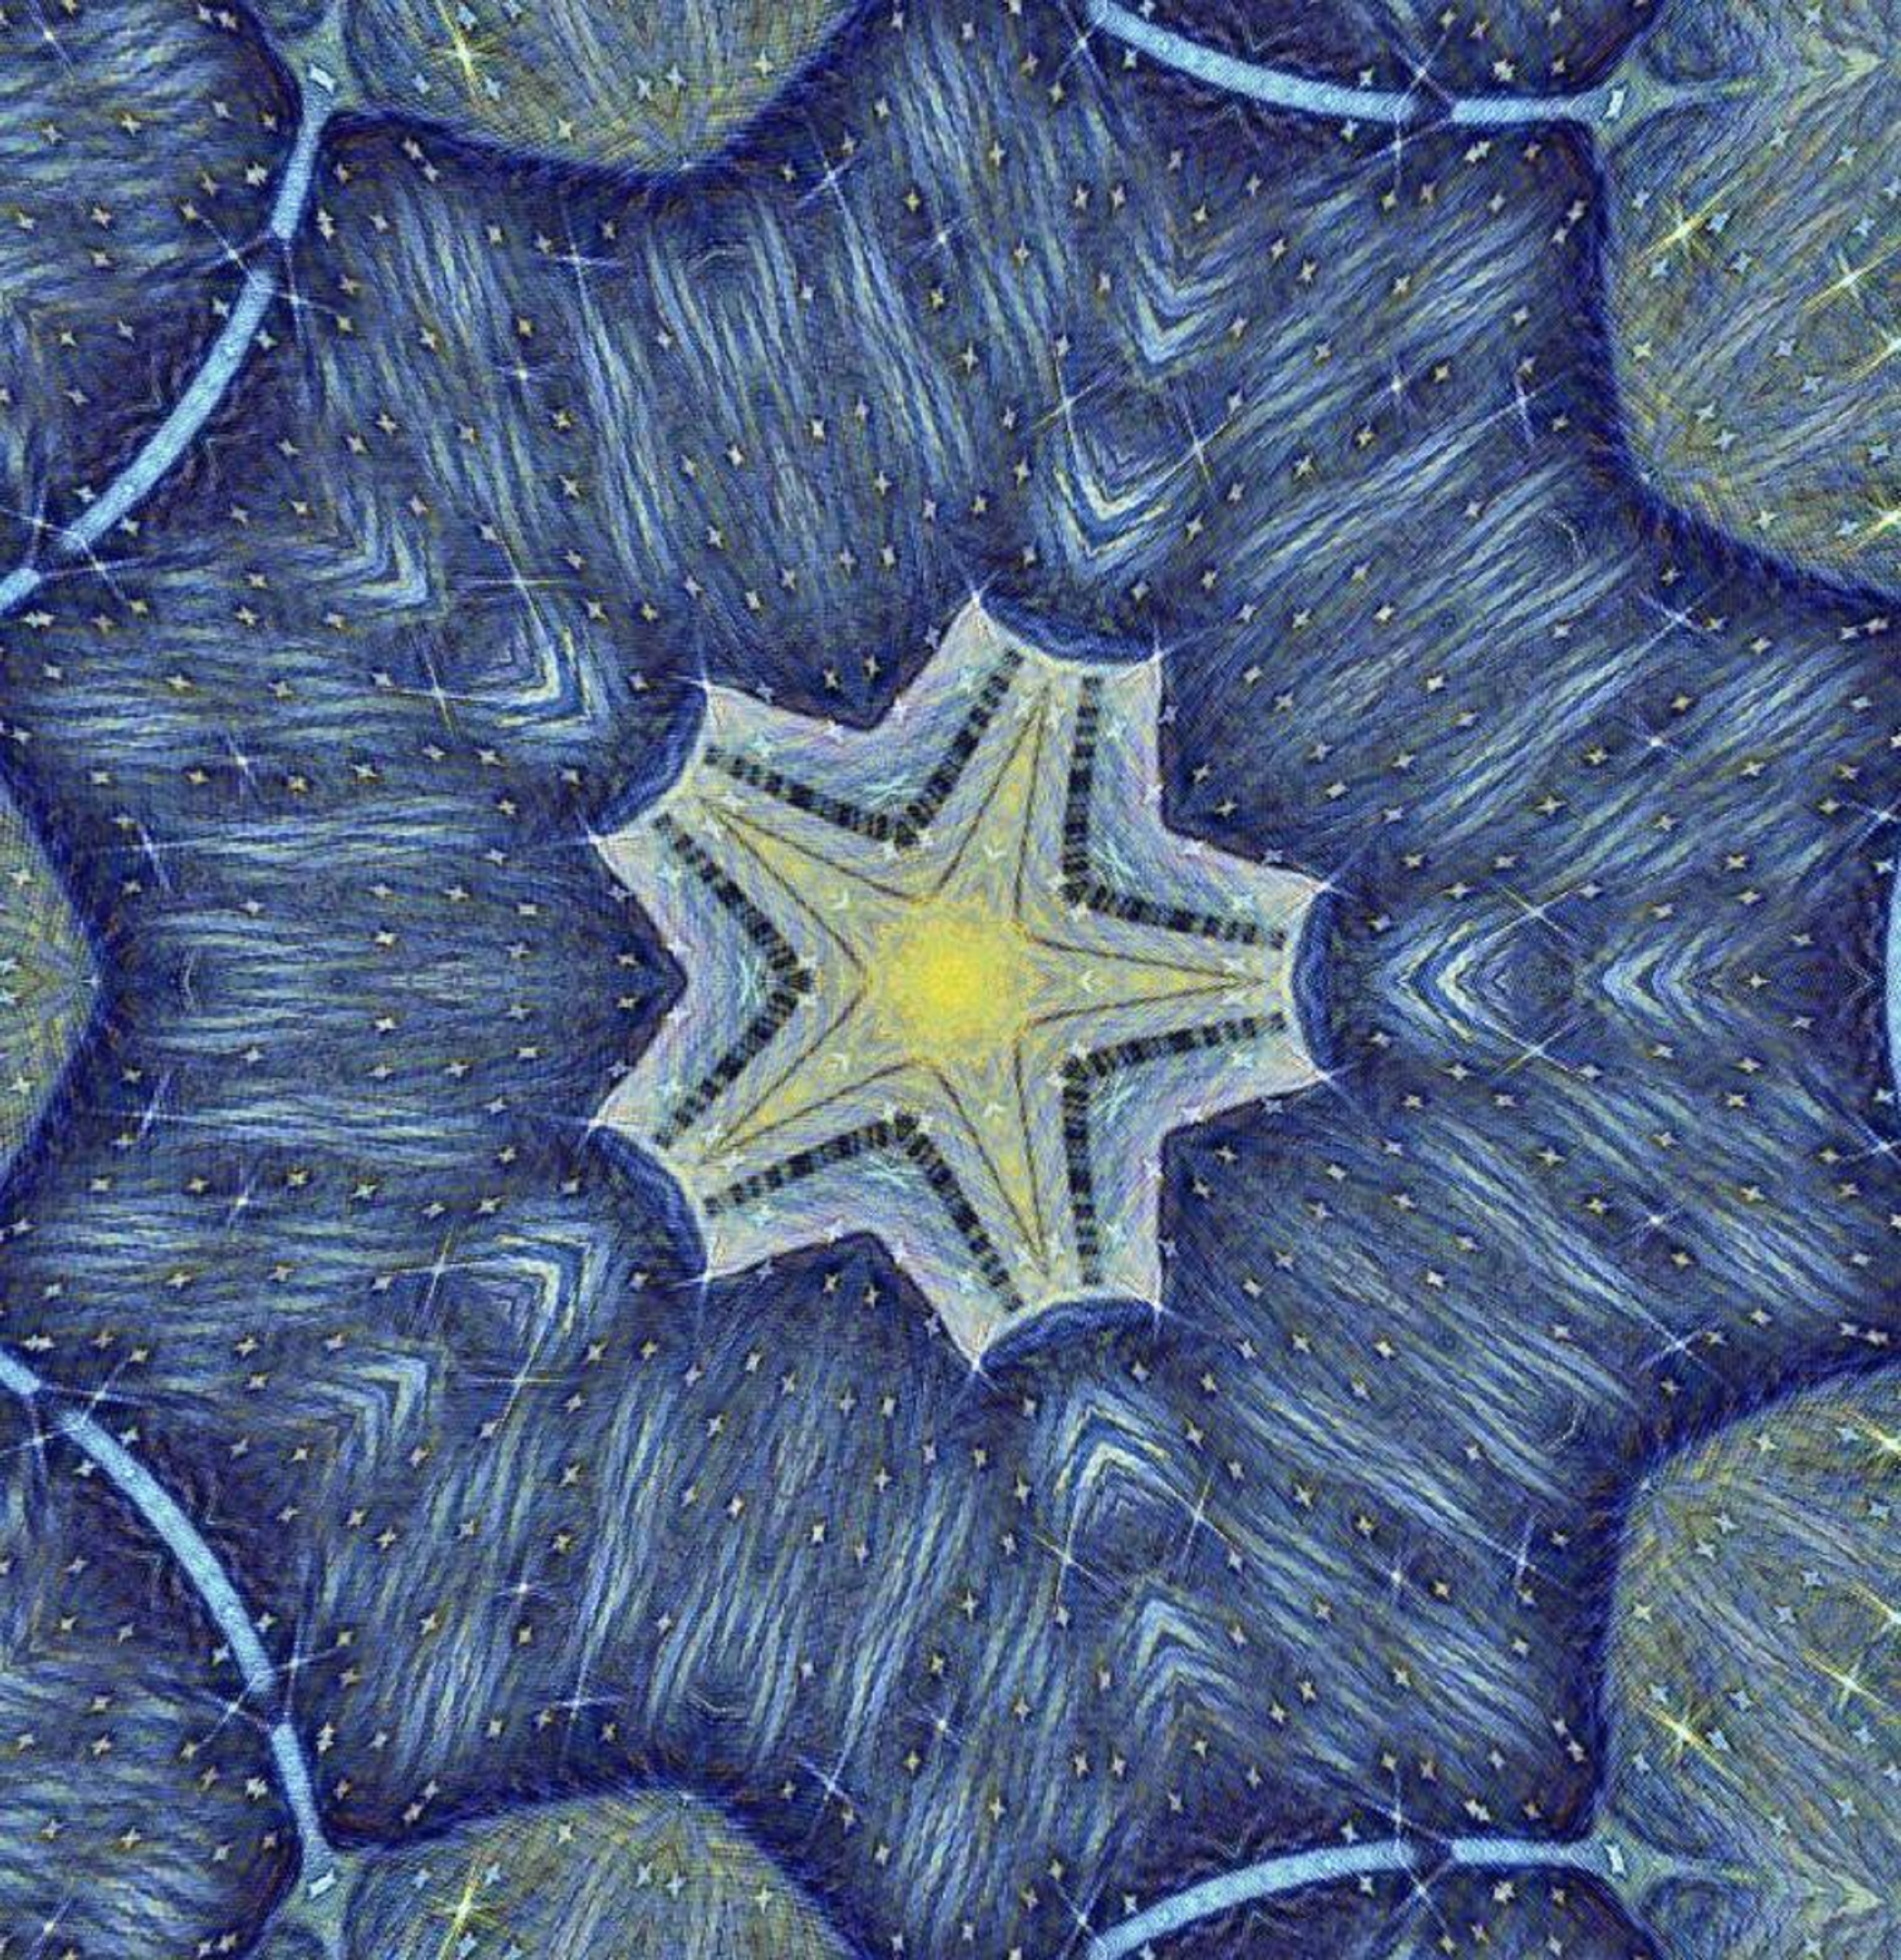 Photo taken by me with Sparkles, Escher, Starry night and Kaleidoscope effects on LuanPic.com 